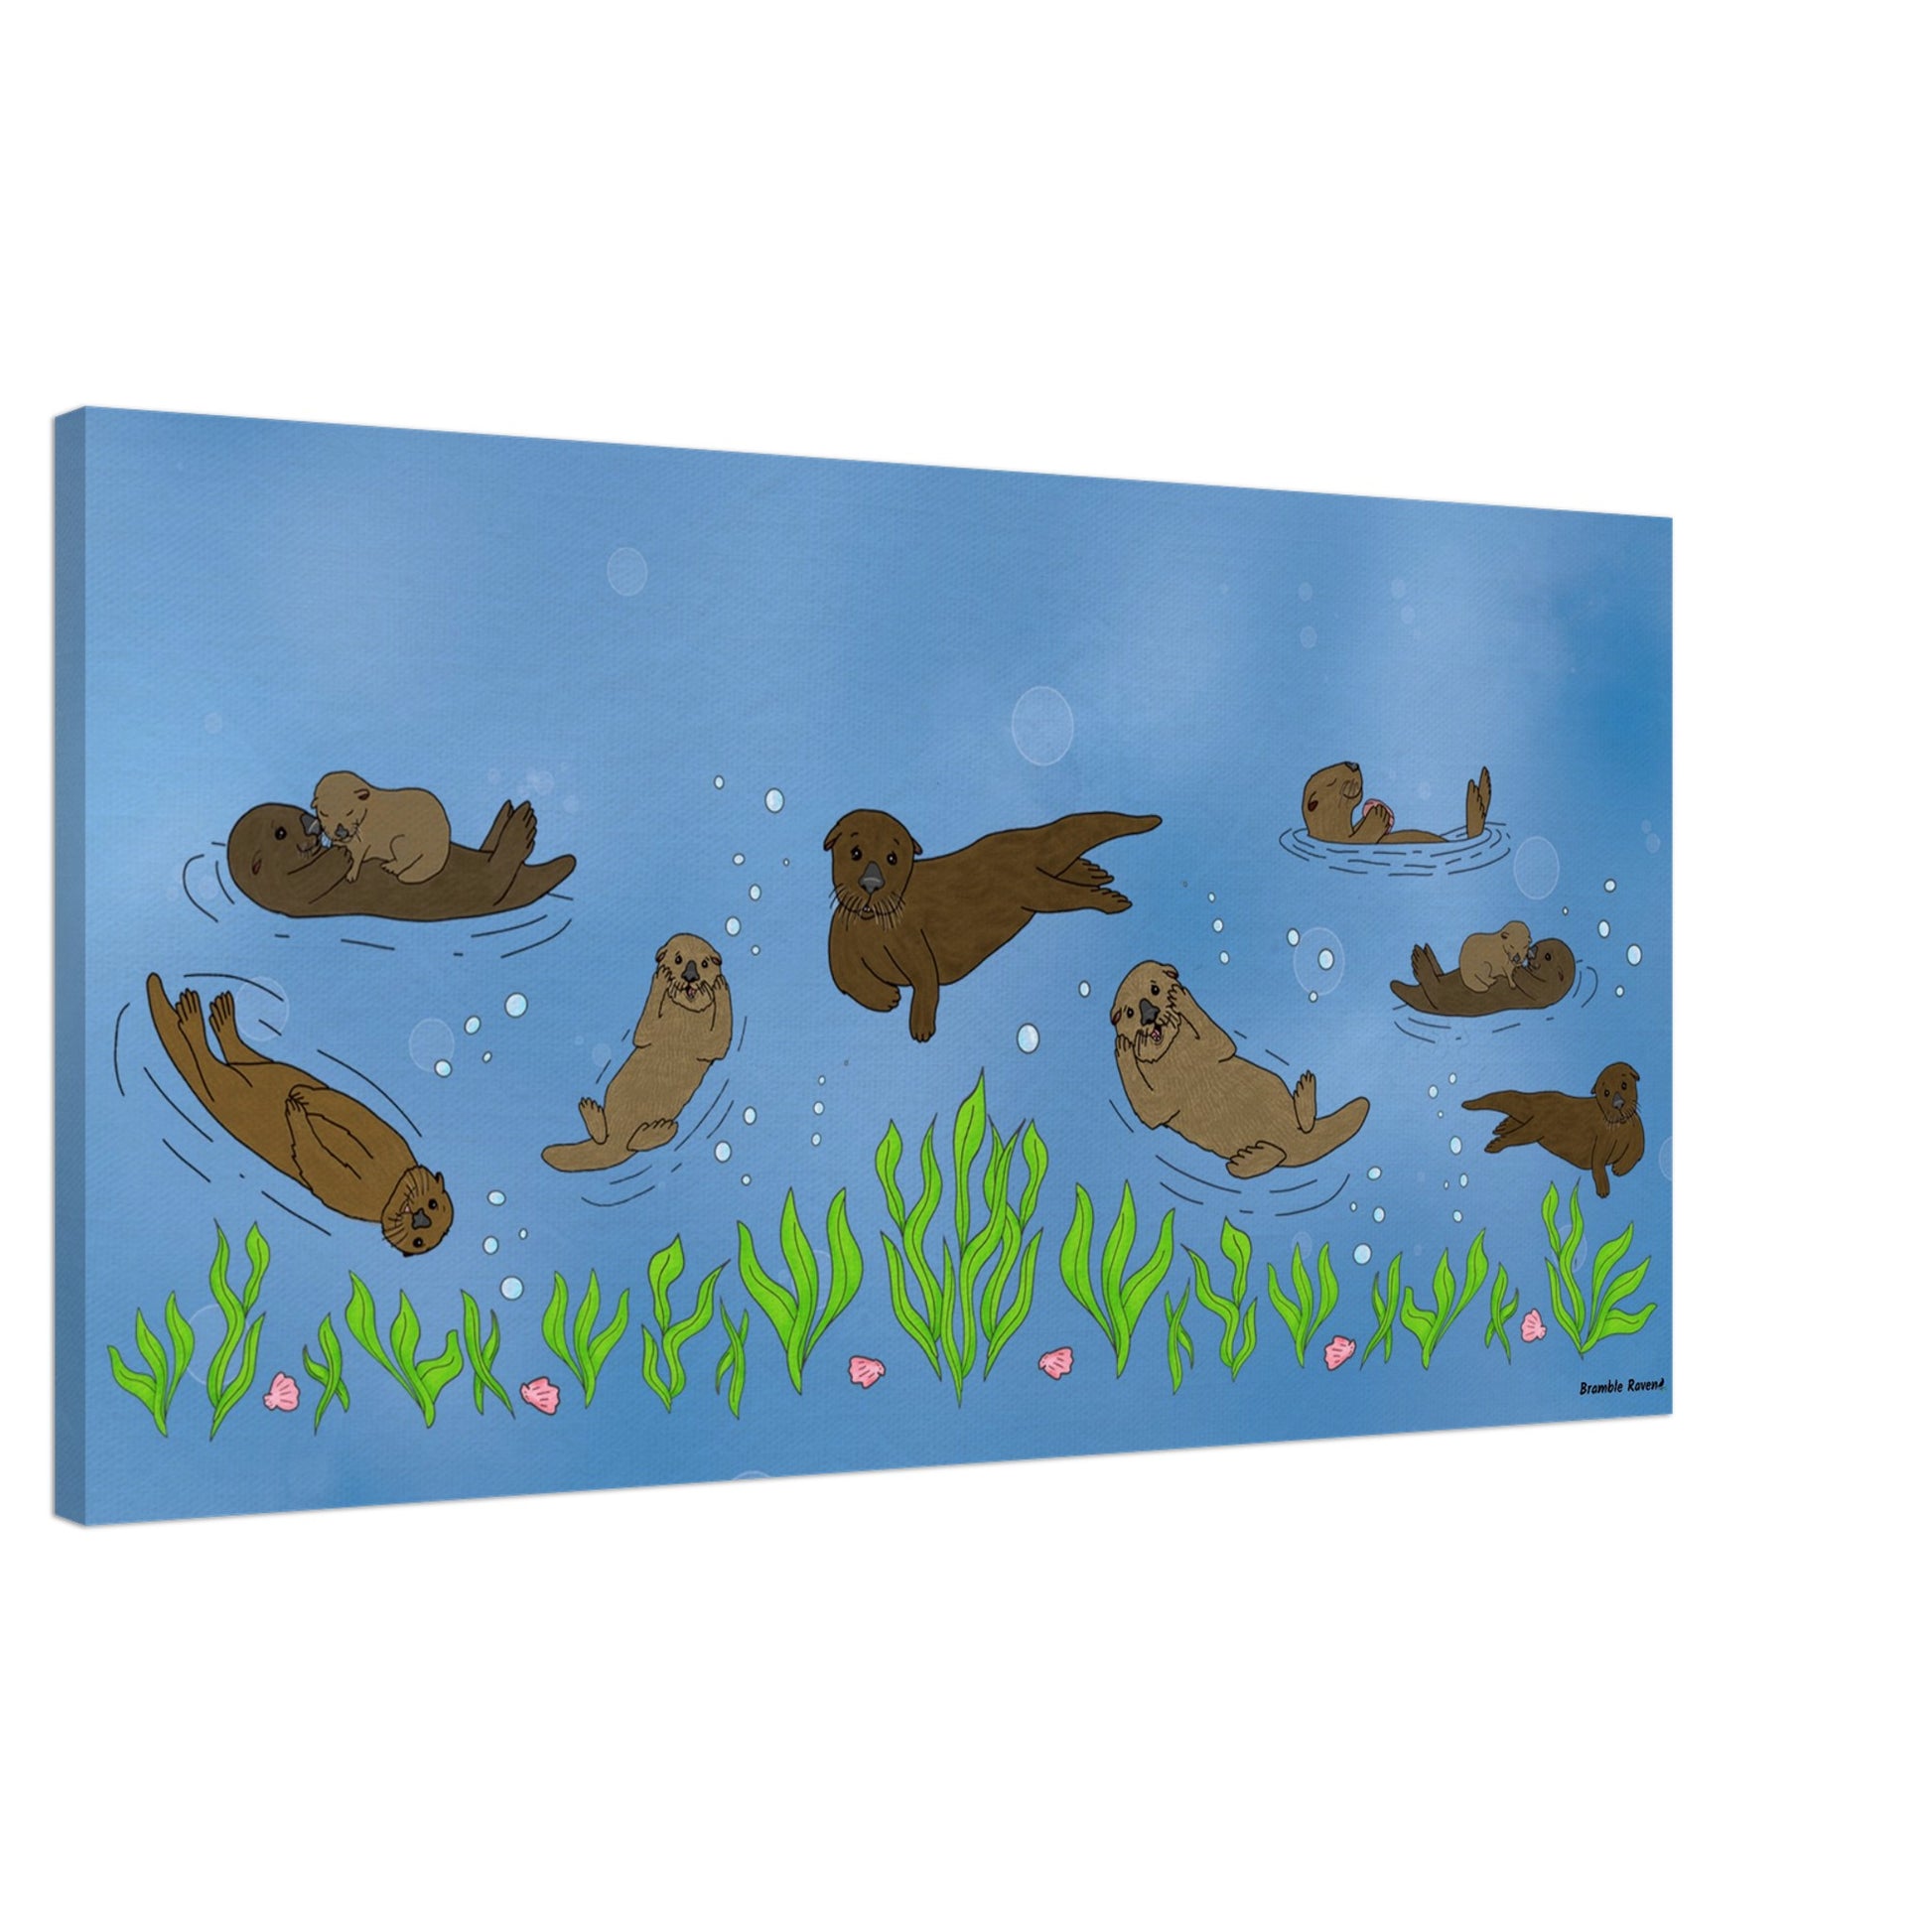 20 by 40 inch slim canvas wall art print of sea otters swimming along the seabed. Shown at an angle.